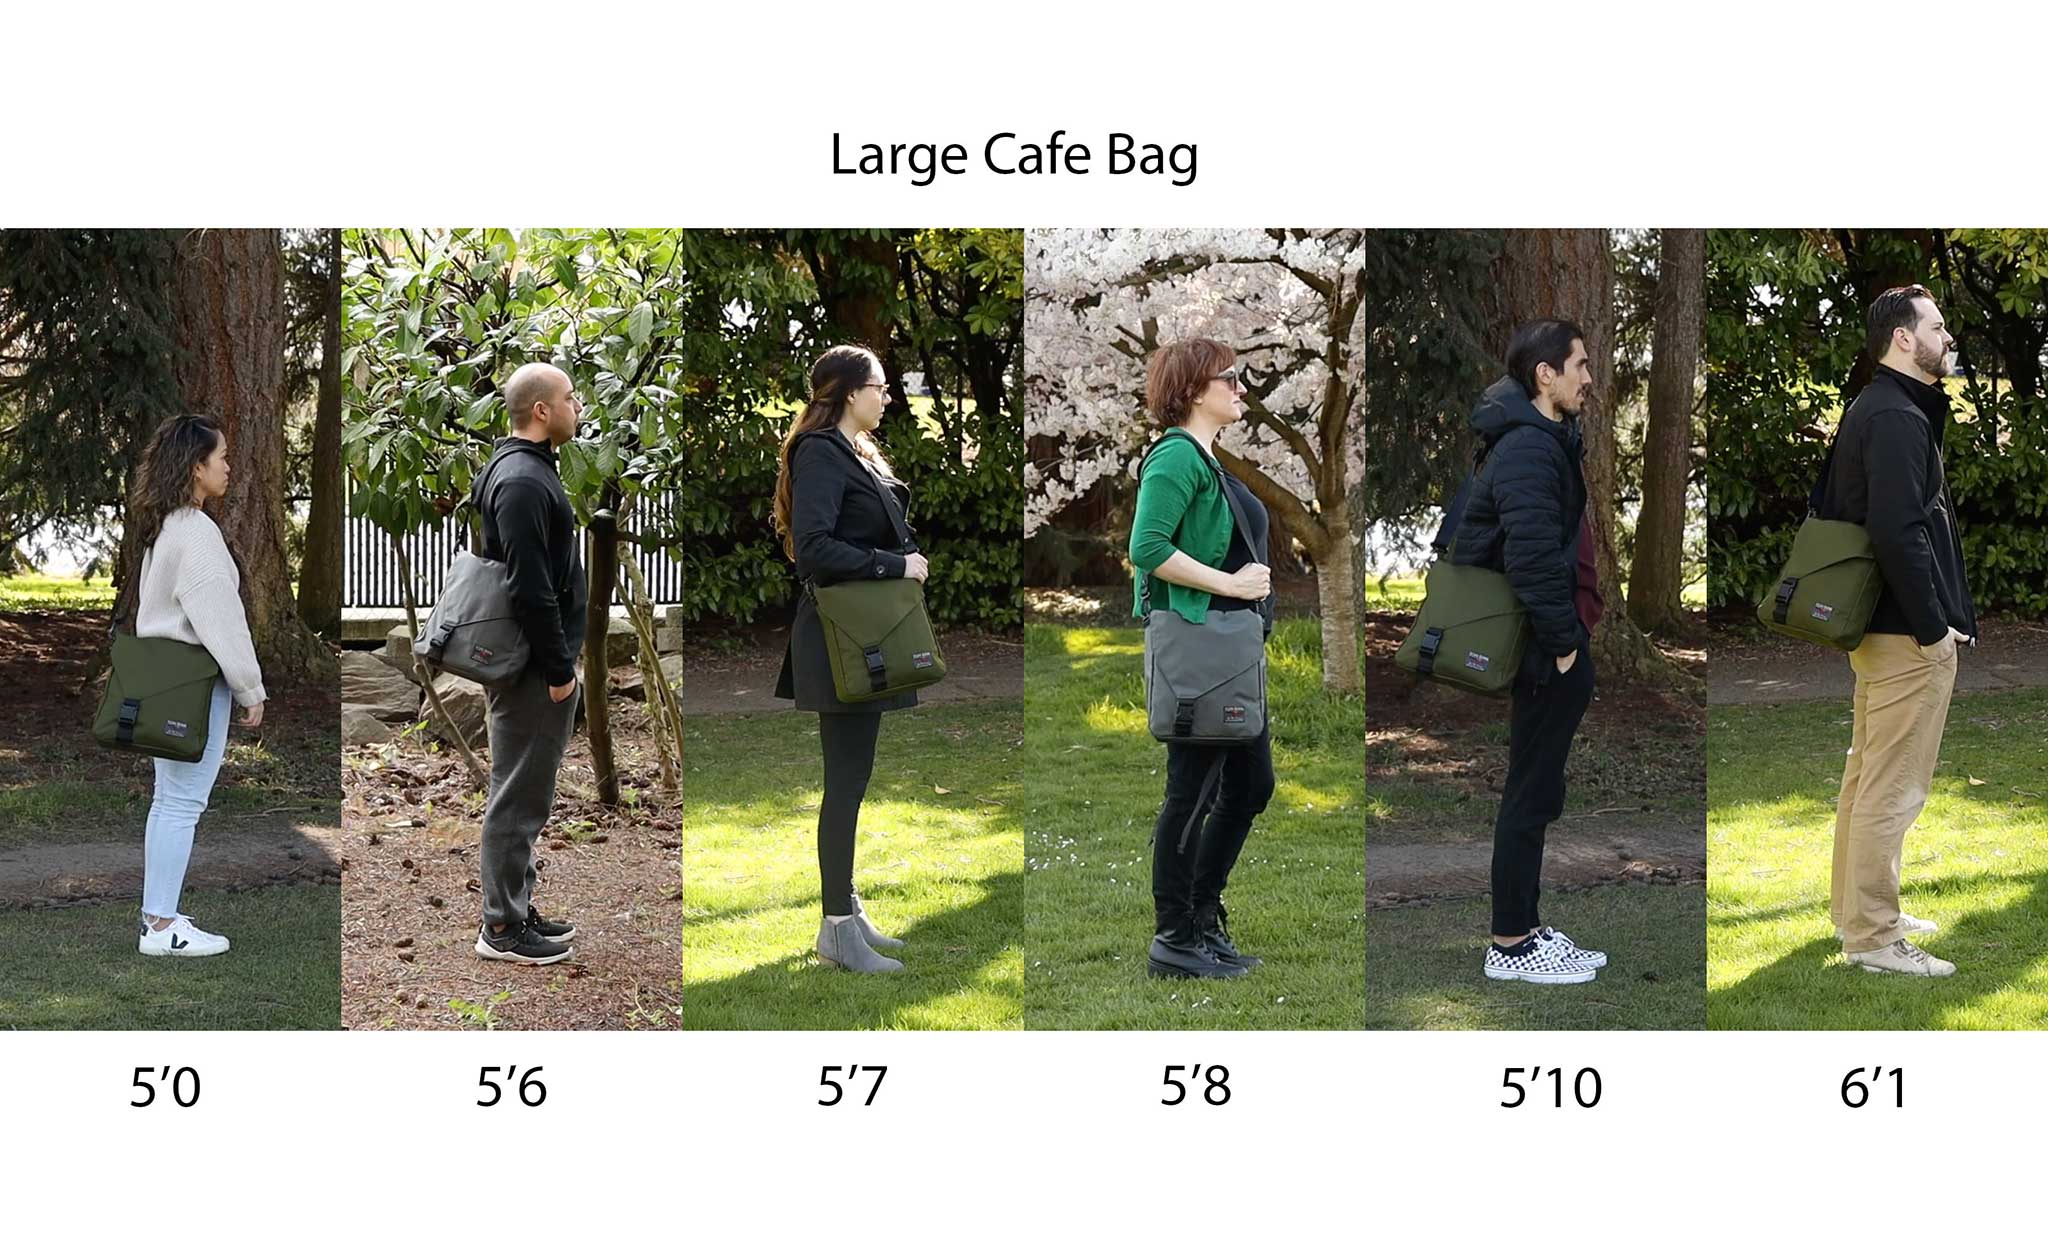 Large Cafe Bag being worn by people of various heights standing side-by-side